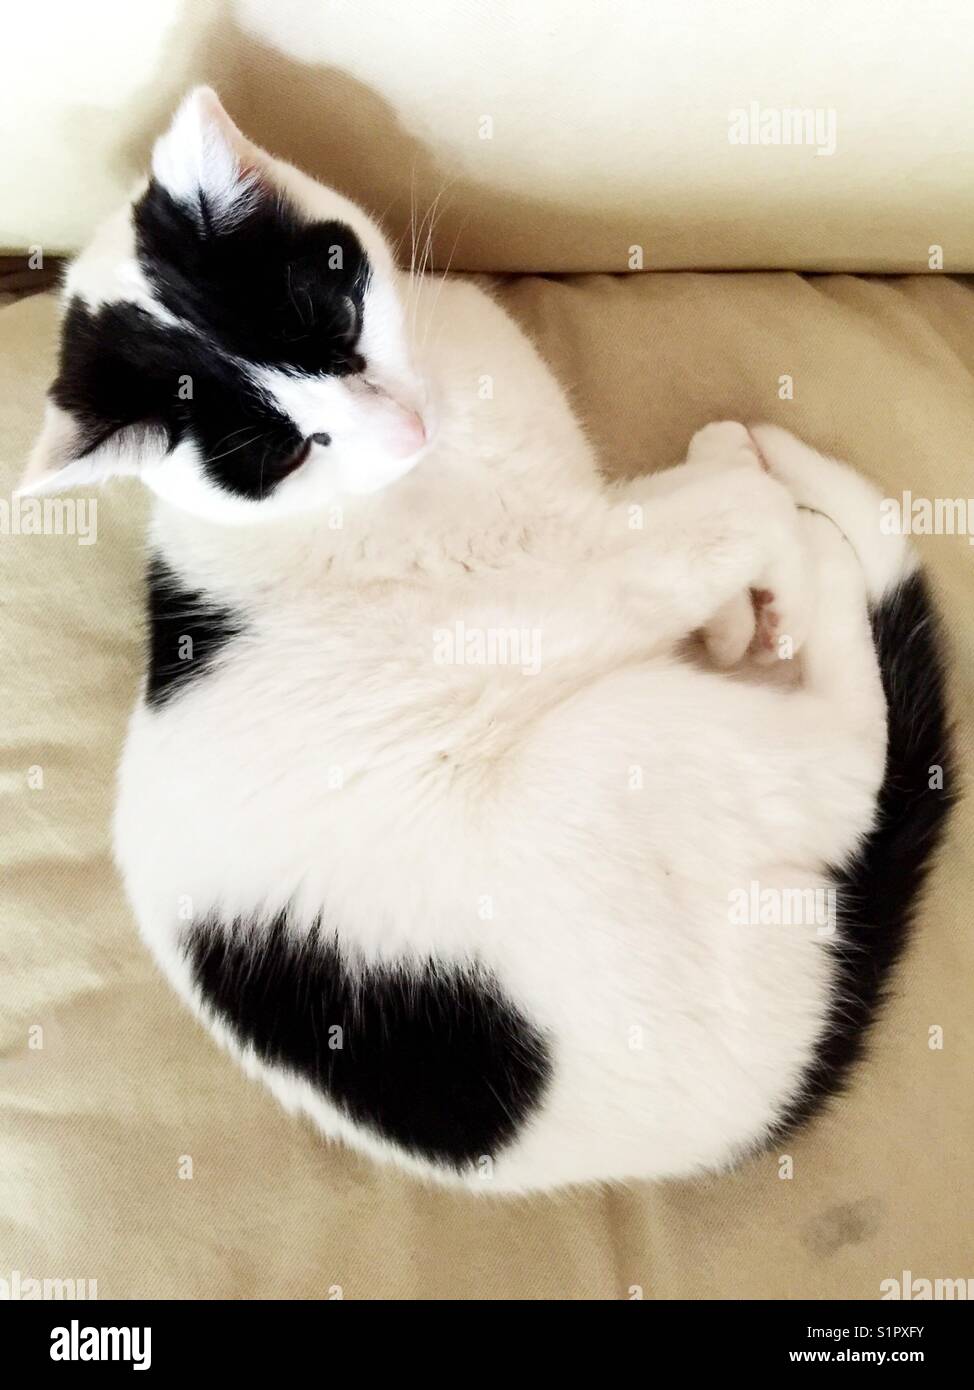 Tuxedo cat with interesting markings curled up on sofa Stock Photo